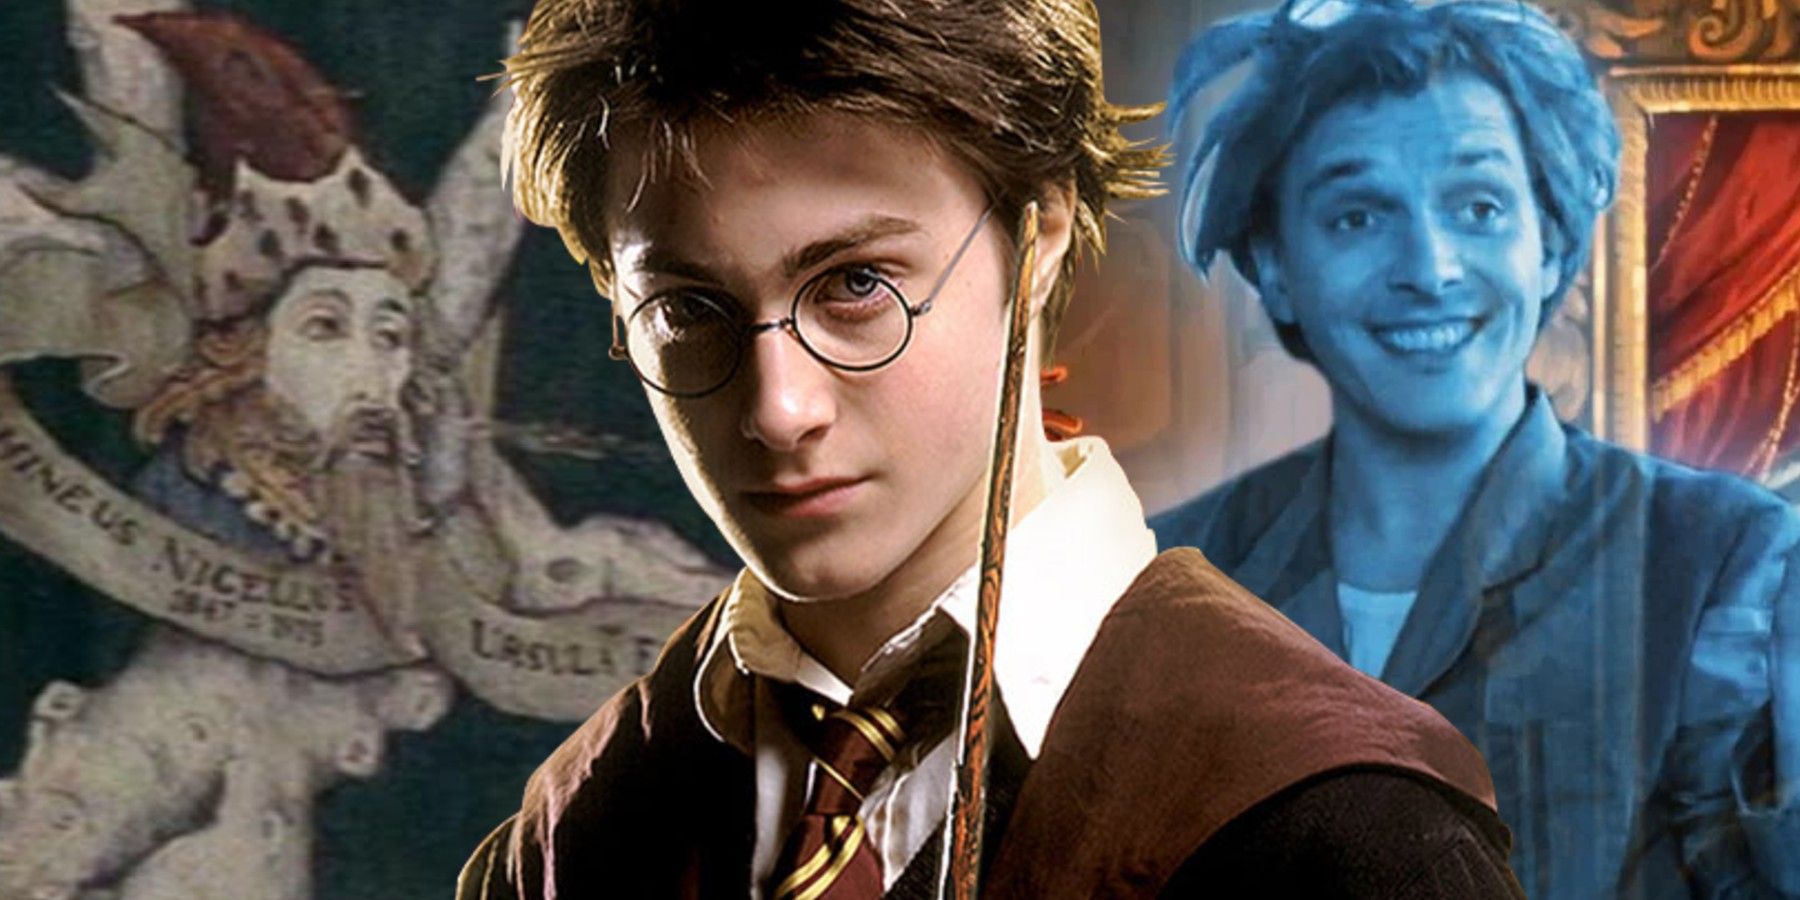 Harry Potter, Character, Books, Movies, & Facts